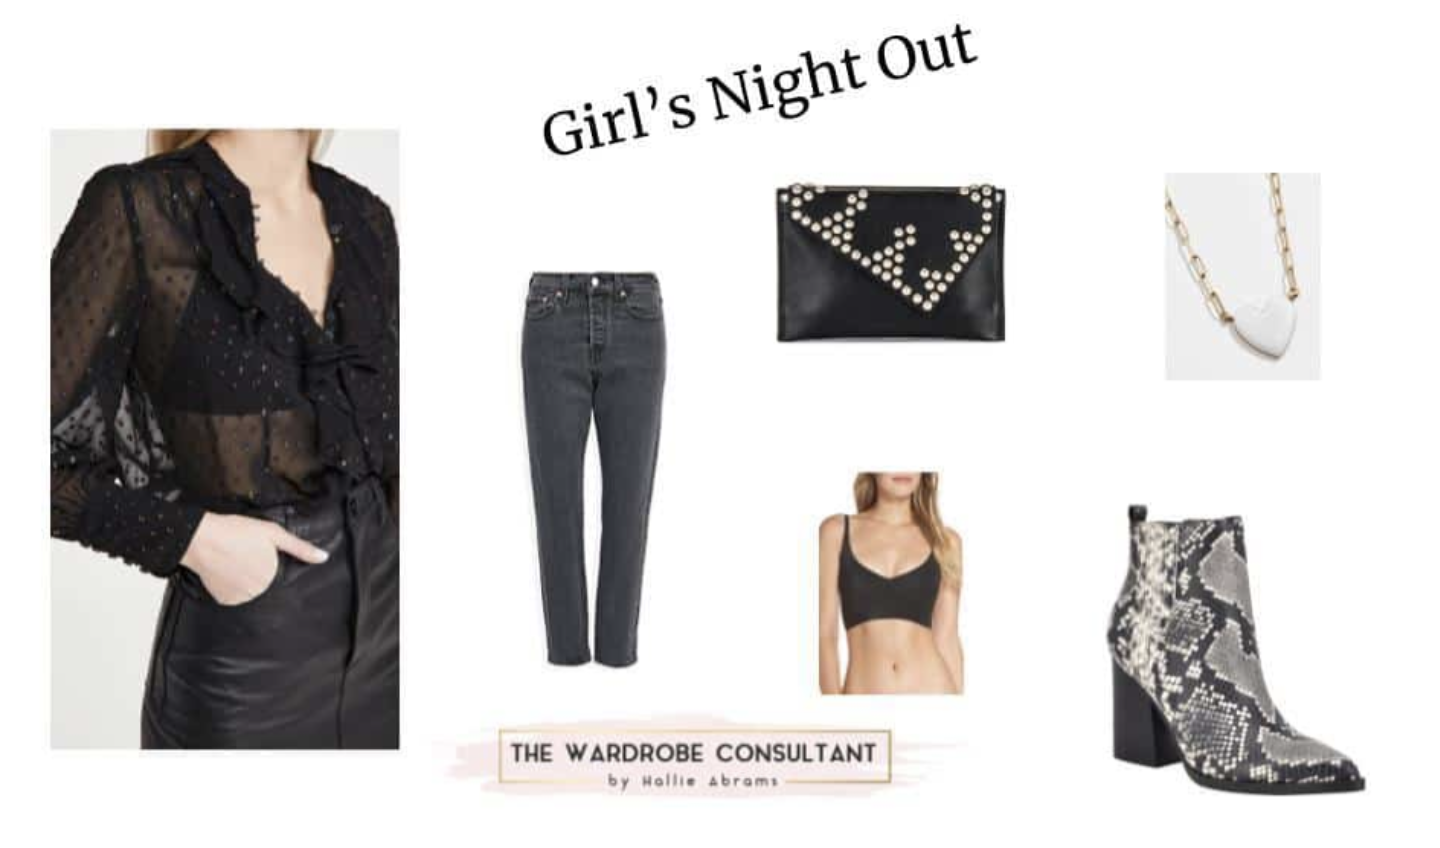 What to Wear for a Girls Night Out (or in) – My Simple Formula